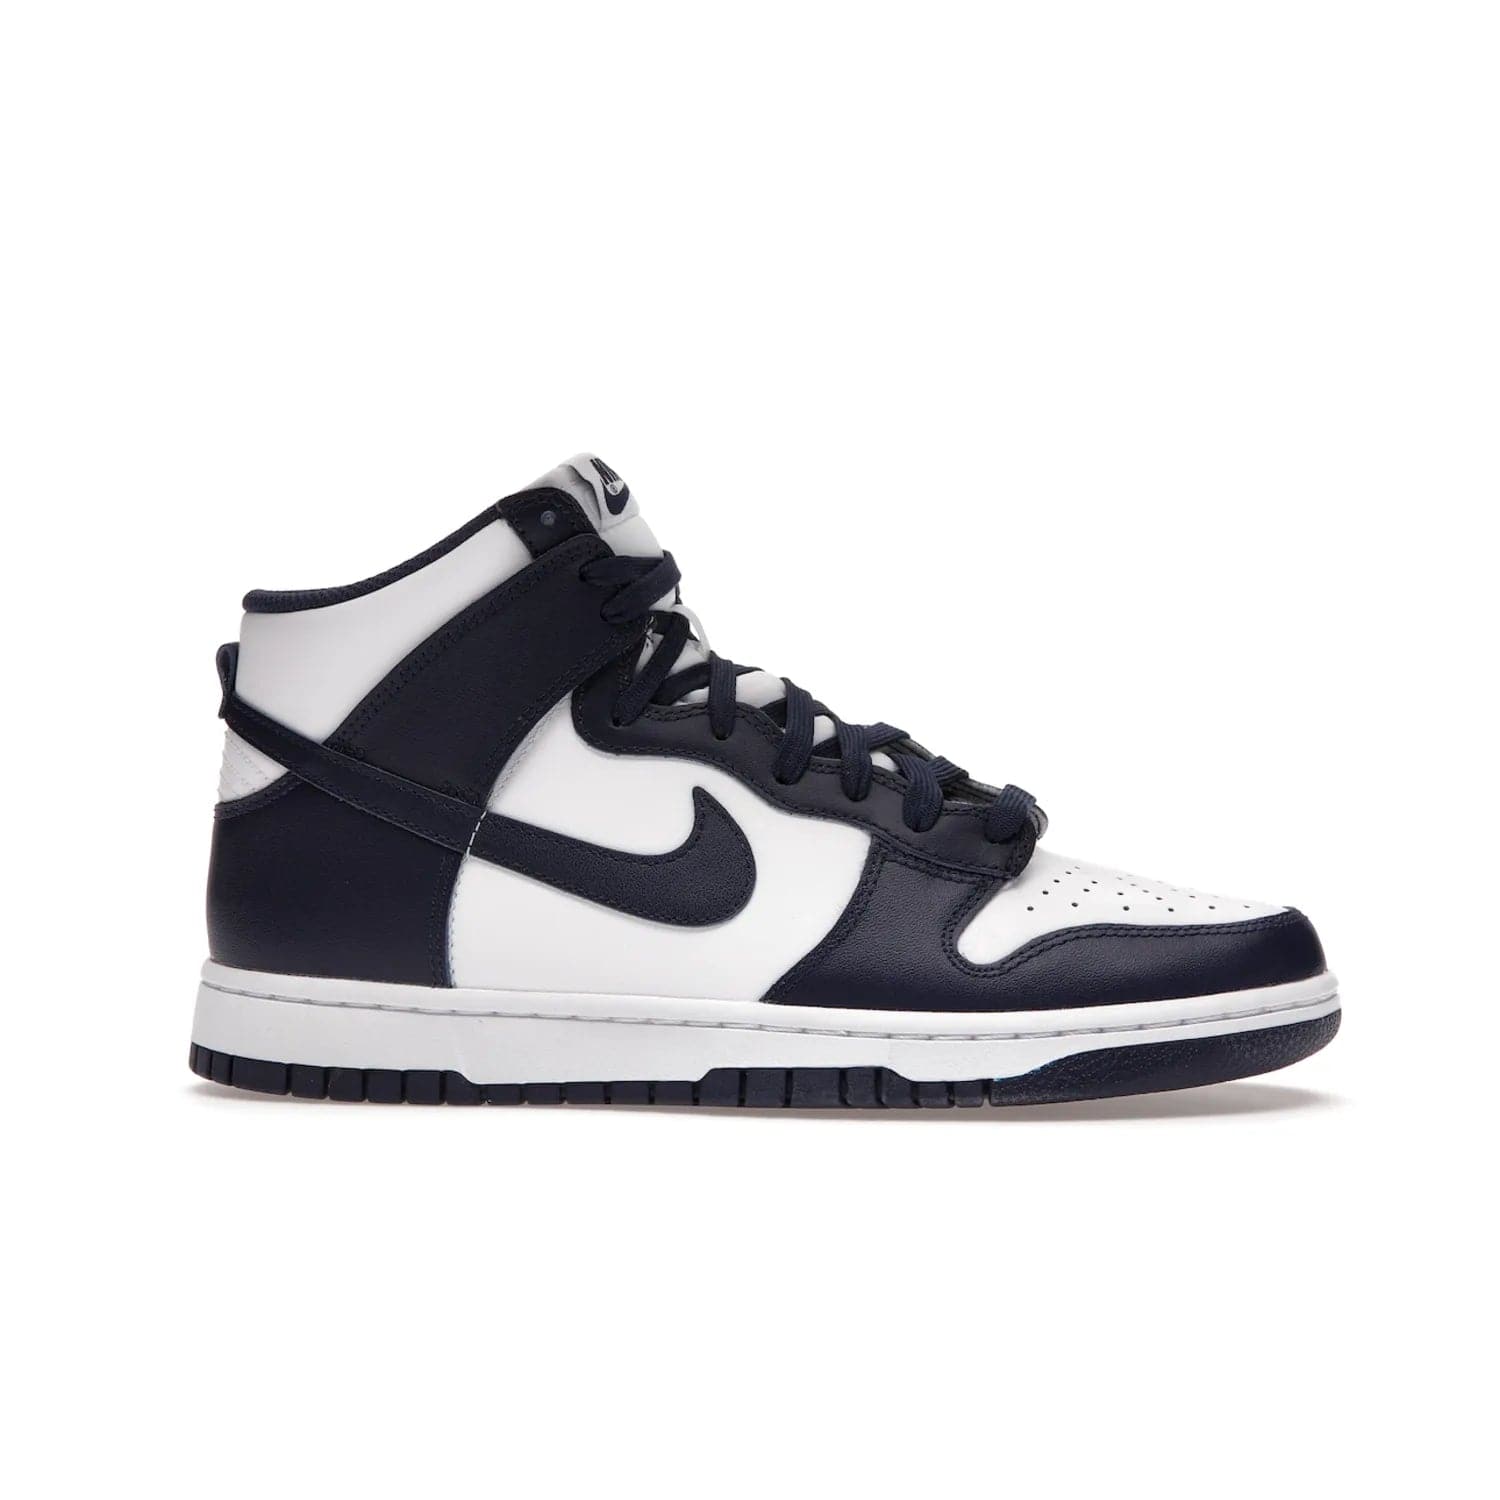 Nike Dunk High Championship Navy - Image 2 - Only at www.BallersClubKickz.com - Classic Nike Dunk High sneaker delivers an unforgettable style with white leather upper, Championship Navy overlays, and matching woven tongue label and sole. Make a statement with the Championship Navy today.